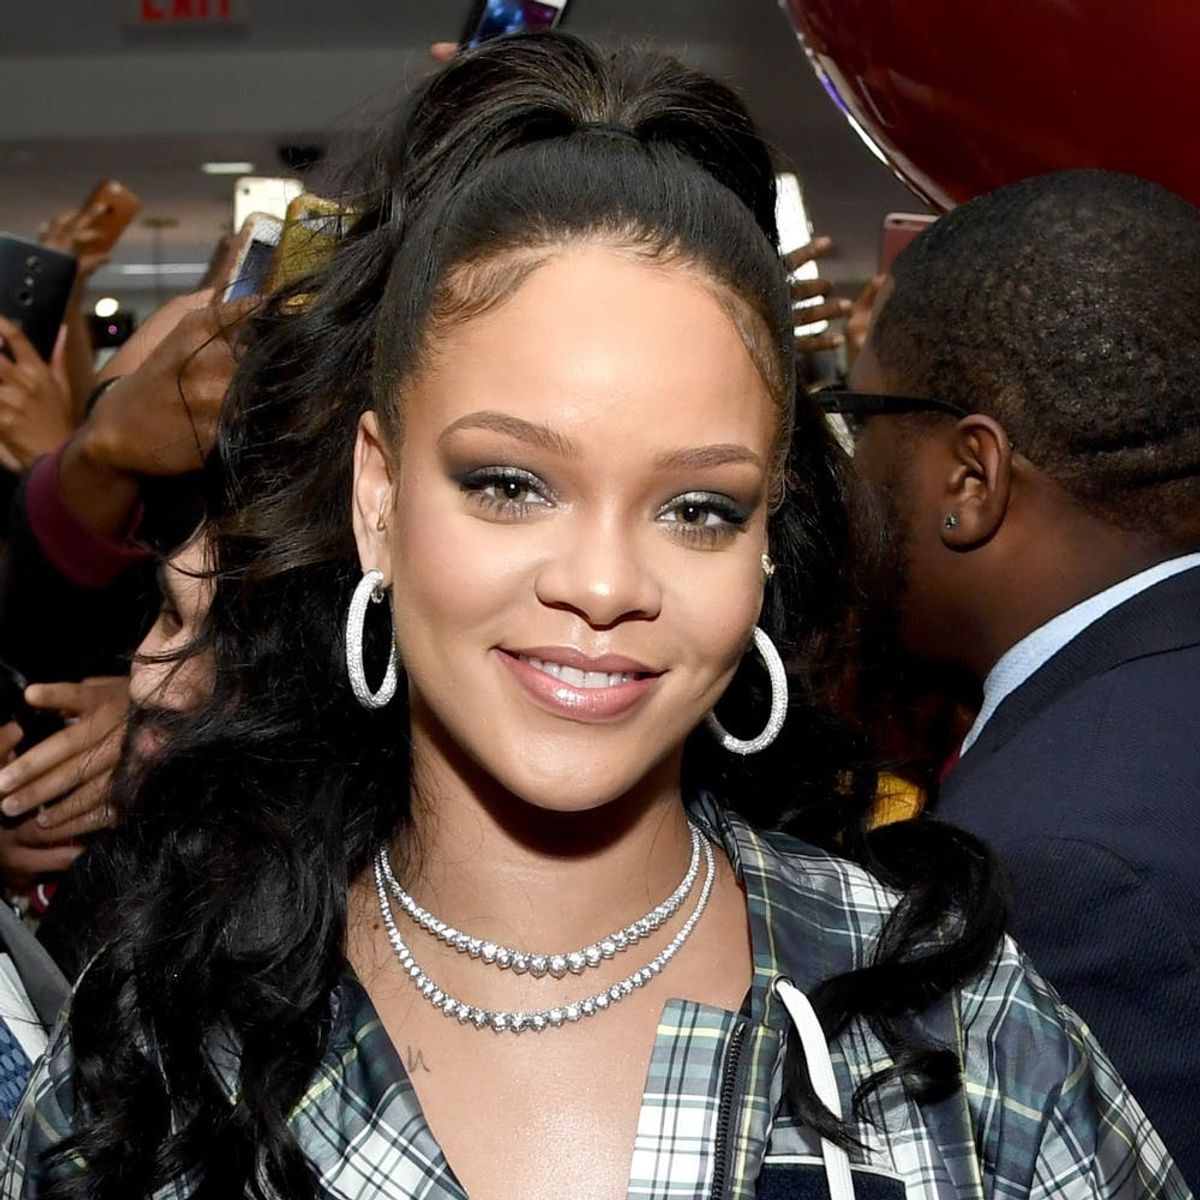 Rihanna Wore a Massive Ring on *That* Finger and Fans Are in a Tizzy